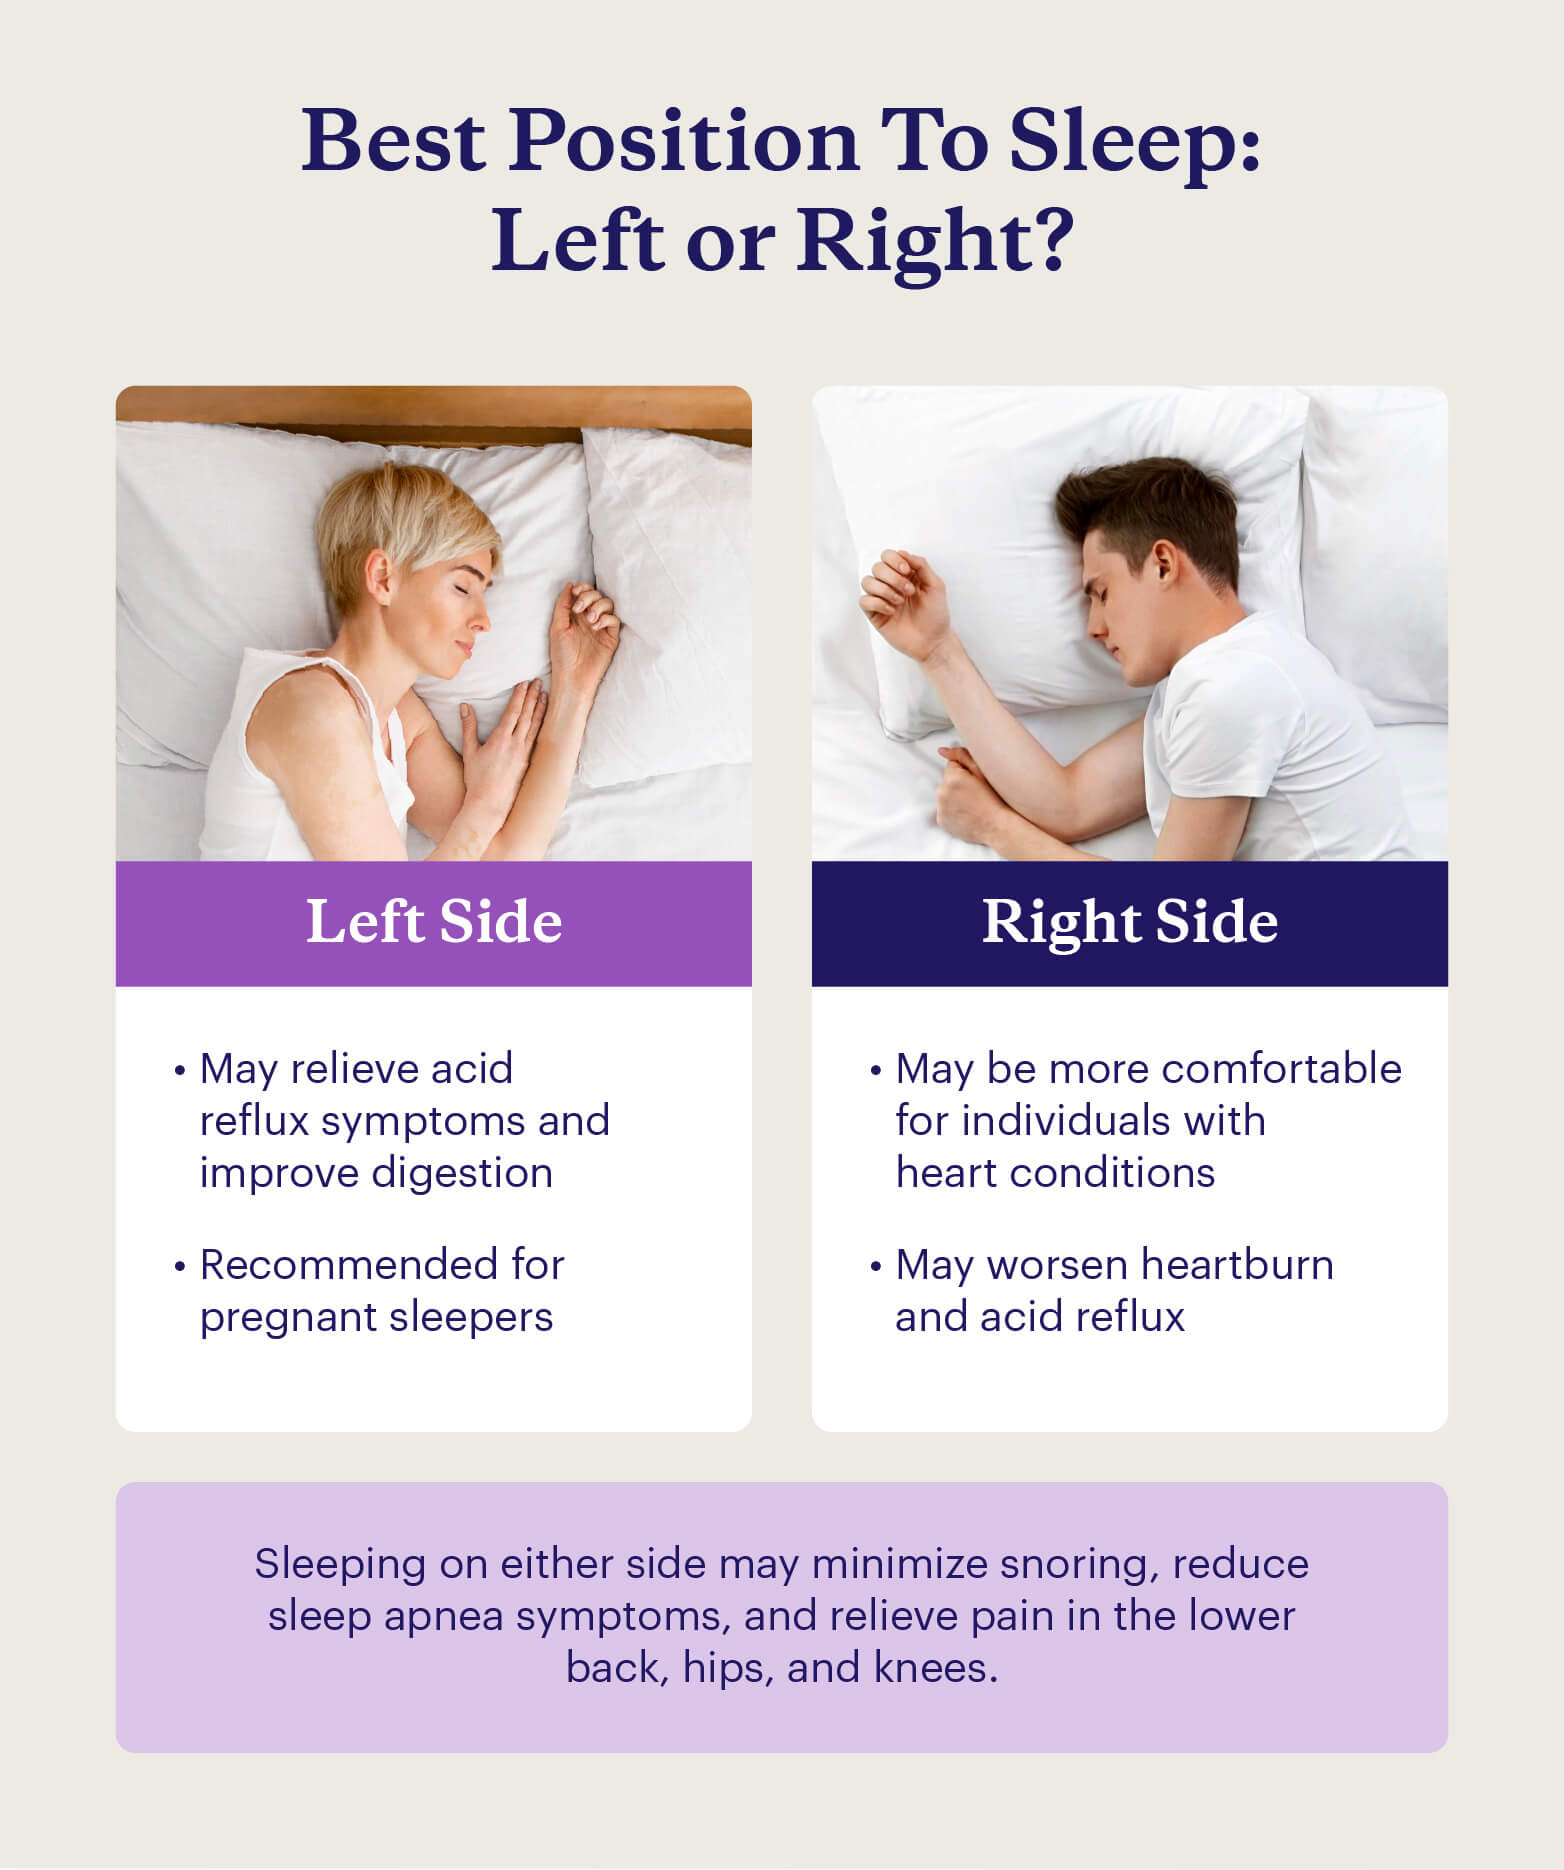 Image of two people sleeping on their left and right sides respectively with benefits and considerations for both.